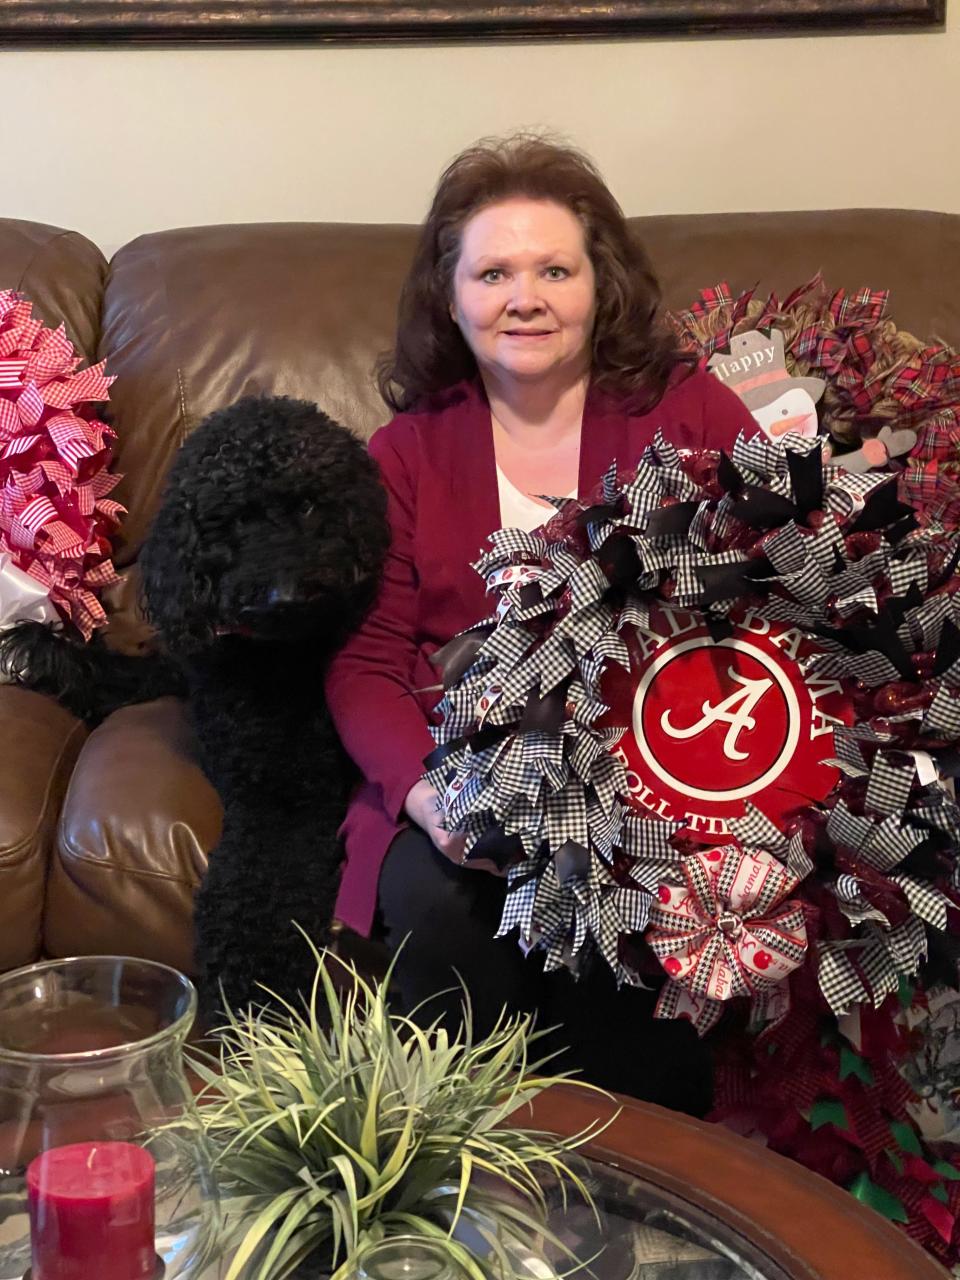 “You’d think, with where we were, Tennessee would be more popular. But for some reason, people want Alabama," says Lisa Perry Lynch of this wreath.